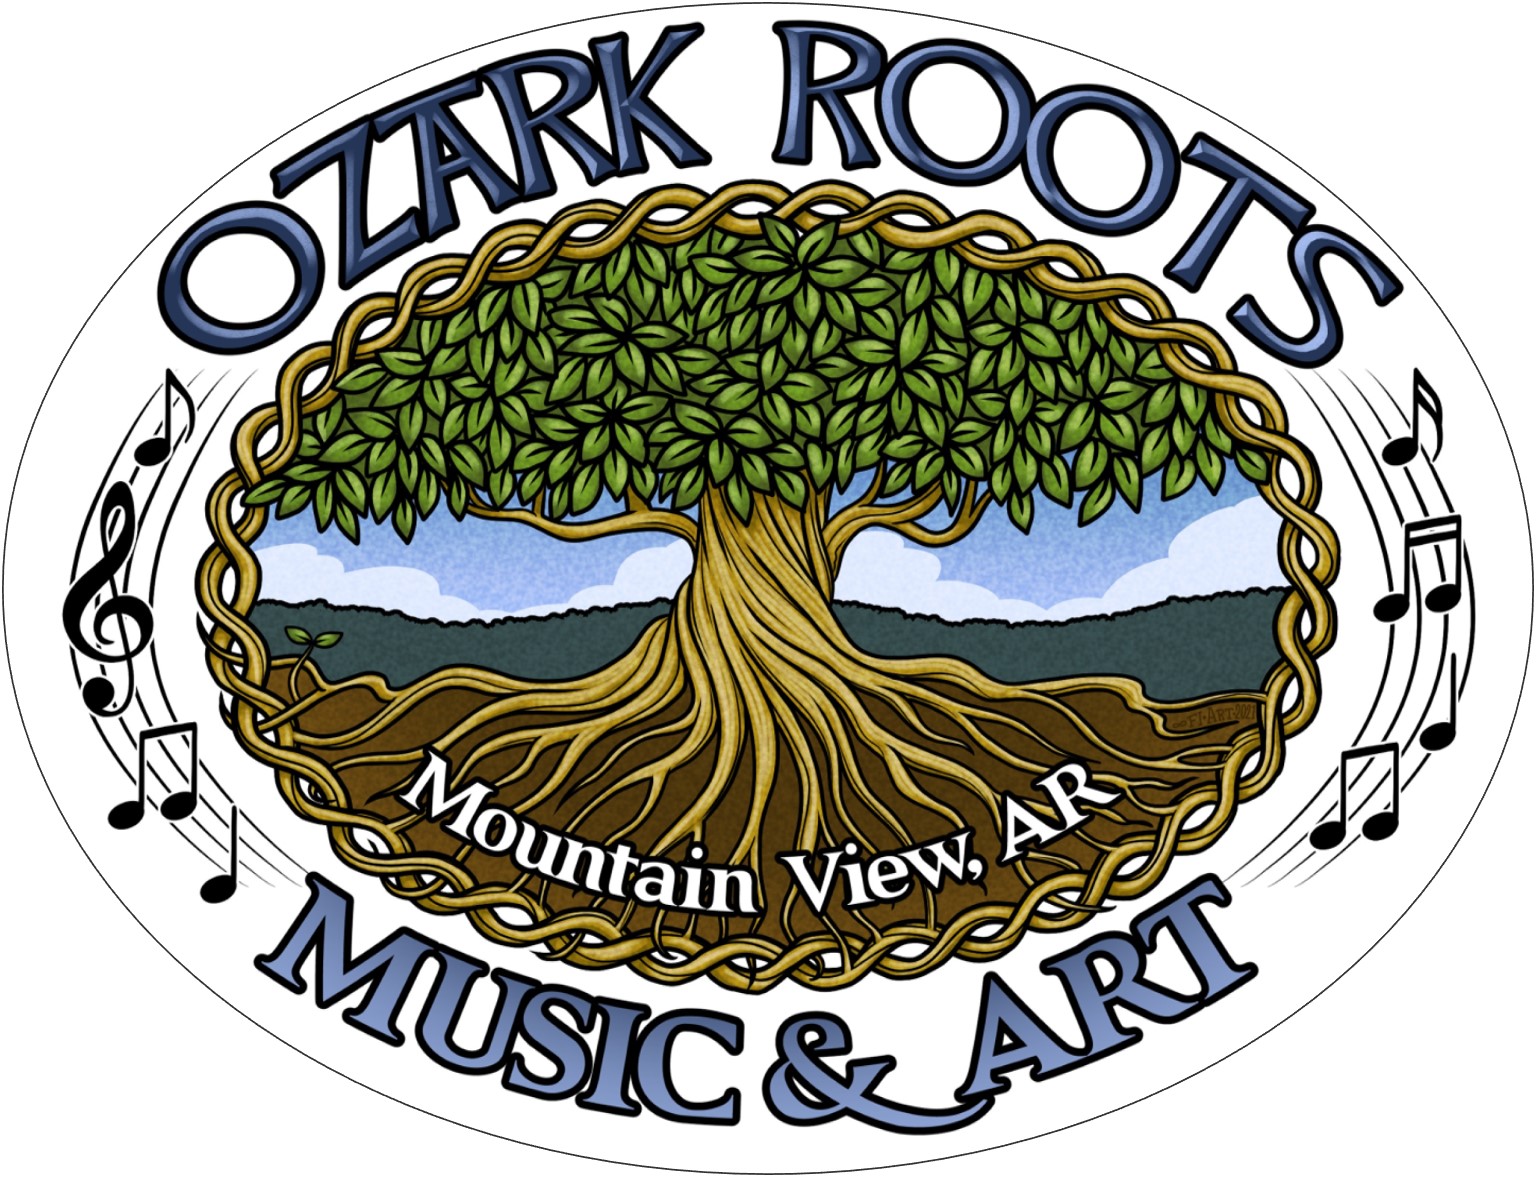 Ozark Roots Music and Art